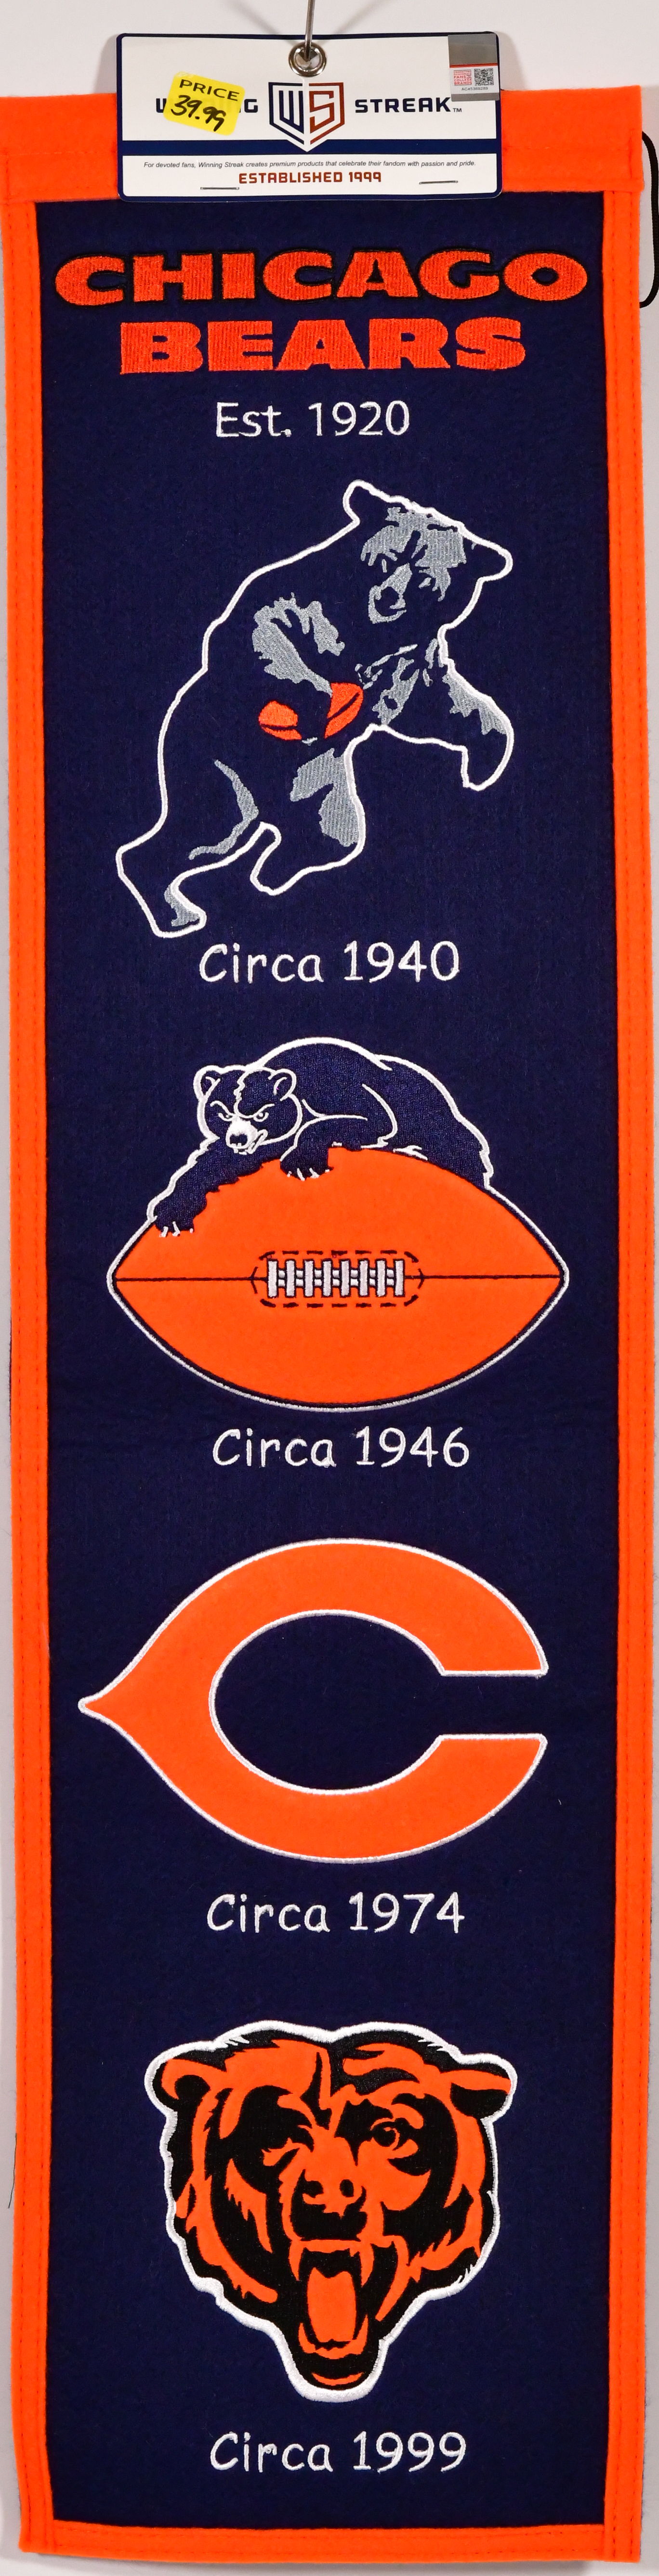 Chicago Bears Heritage Banner – Sports Images & More LLC